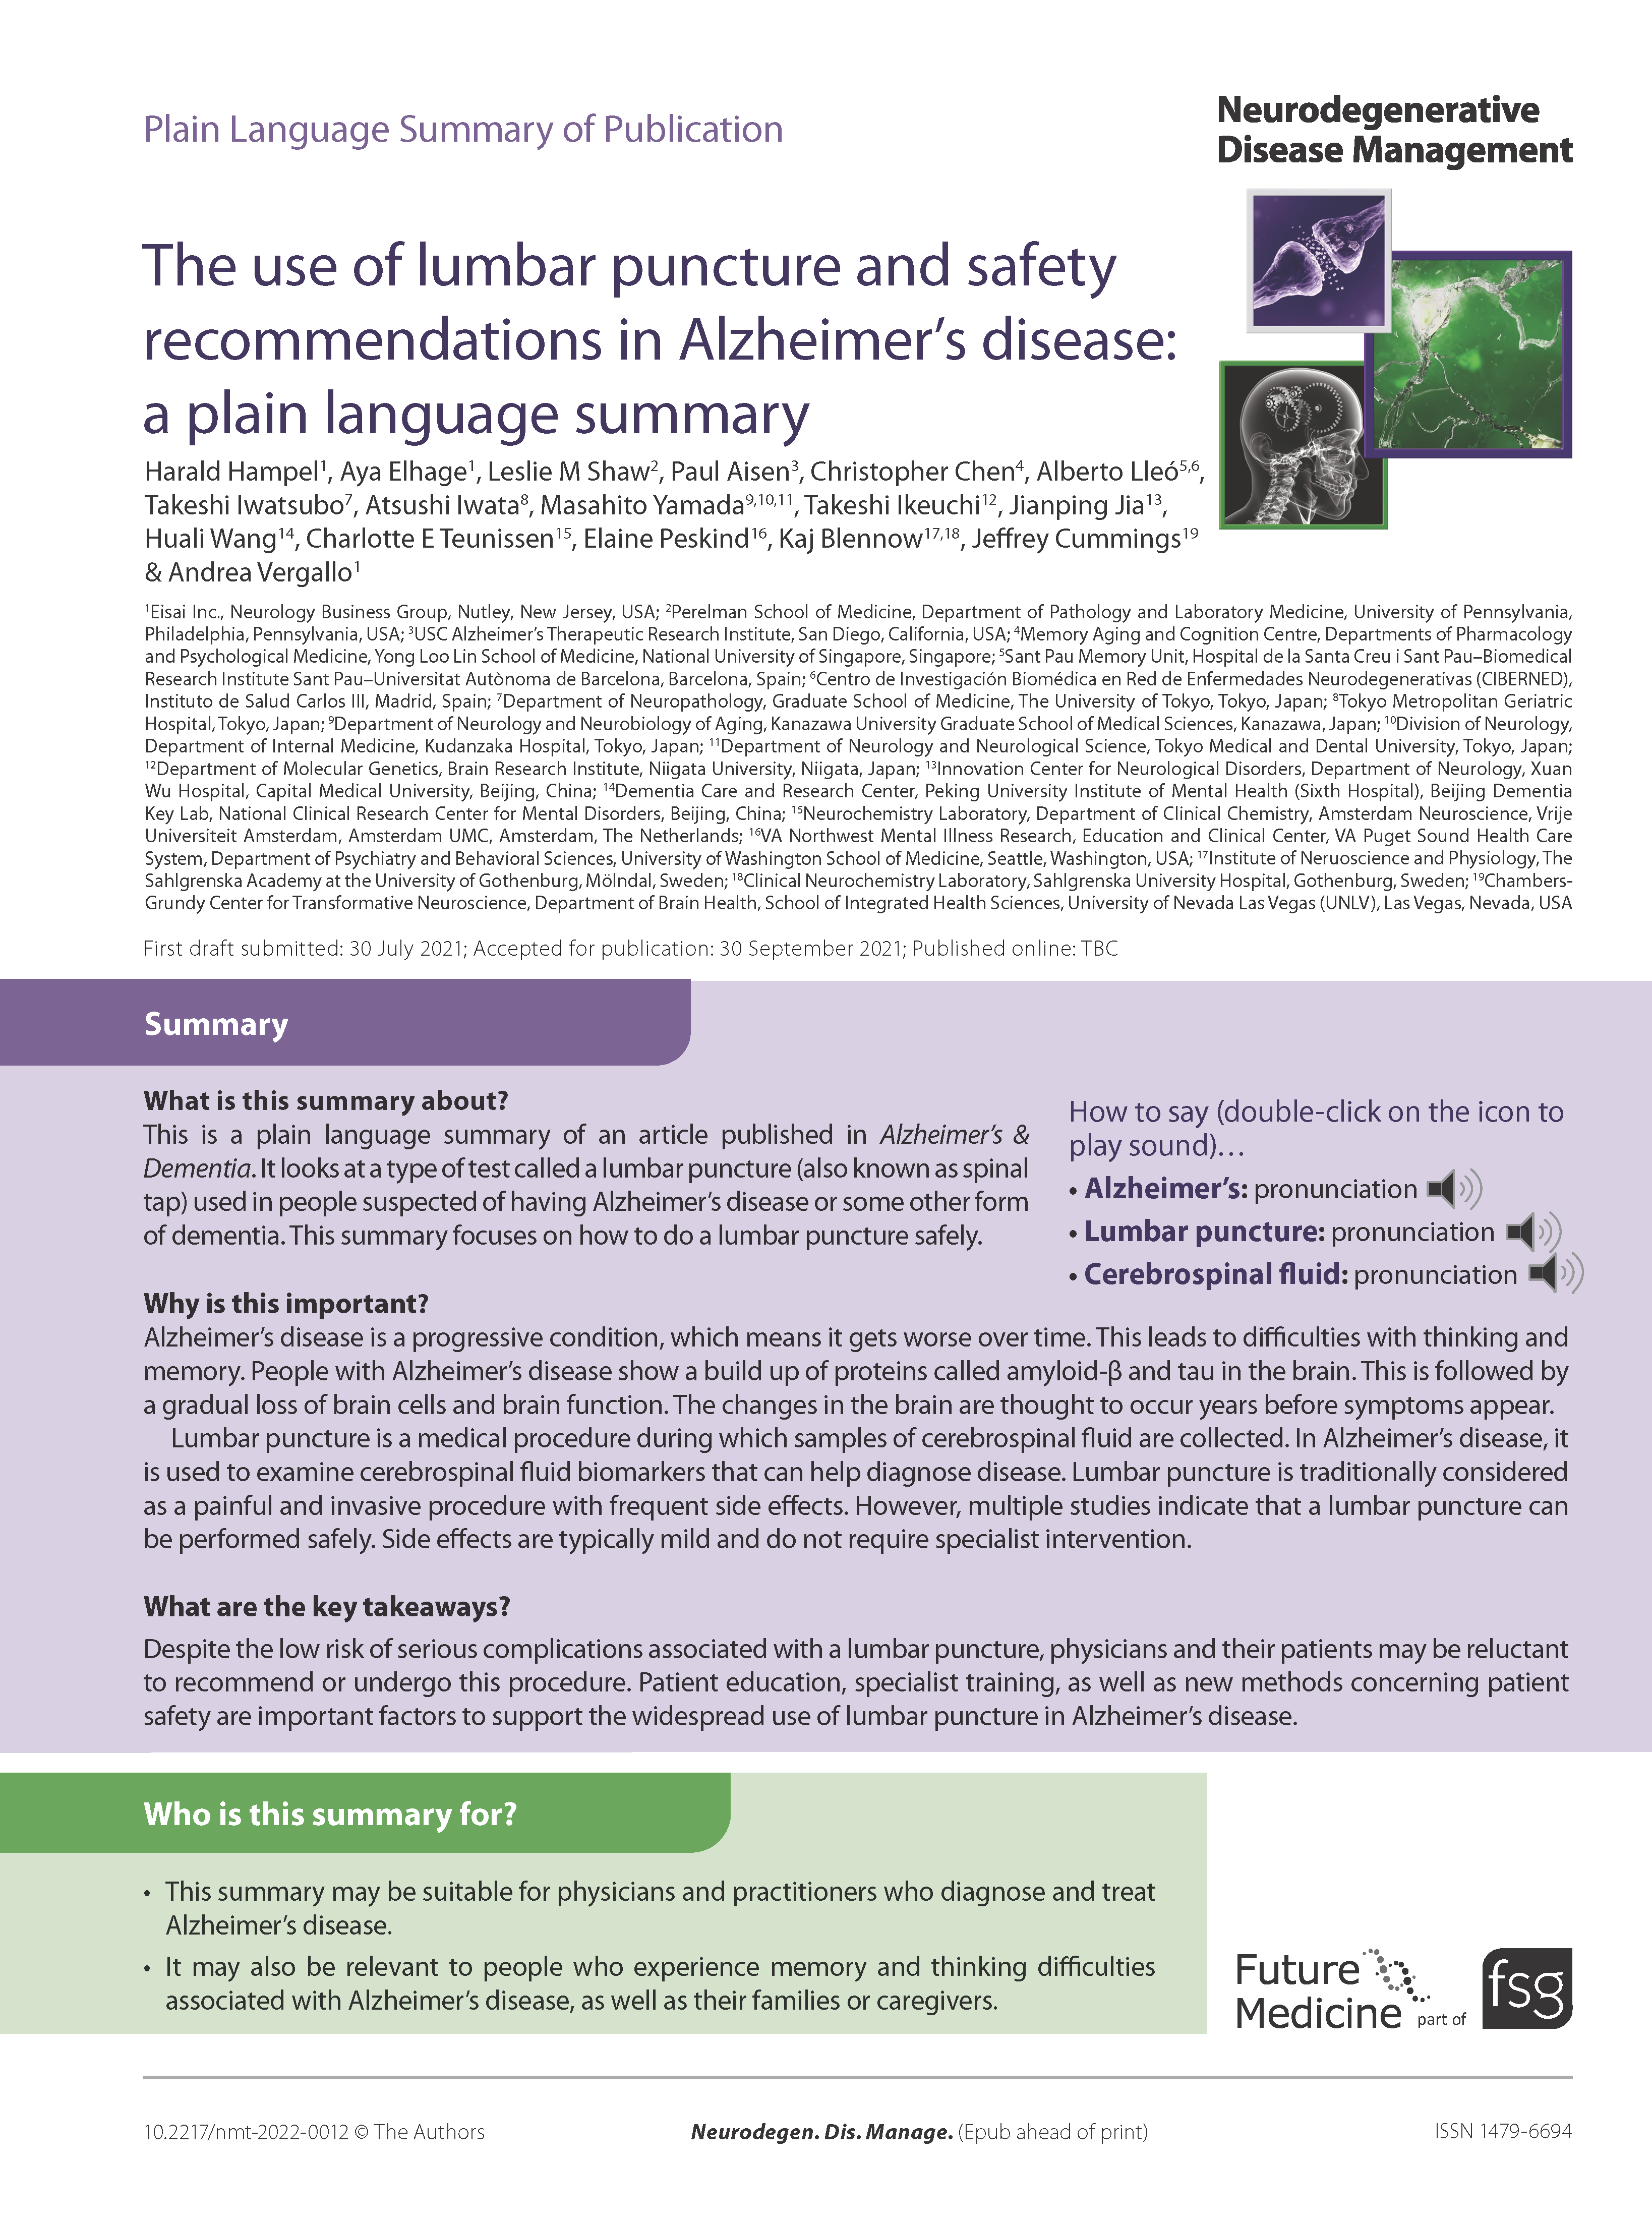 The use of lumbar puncture and safety recommendations in Alzheimer’s disease: a plain language summary